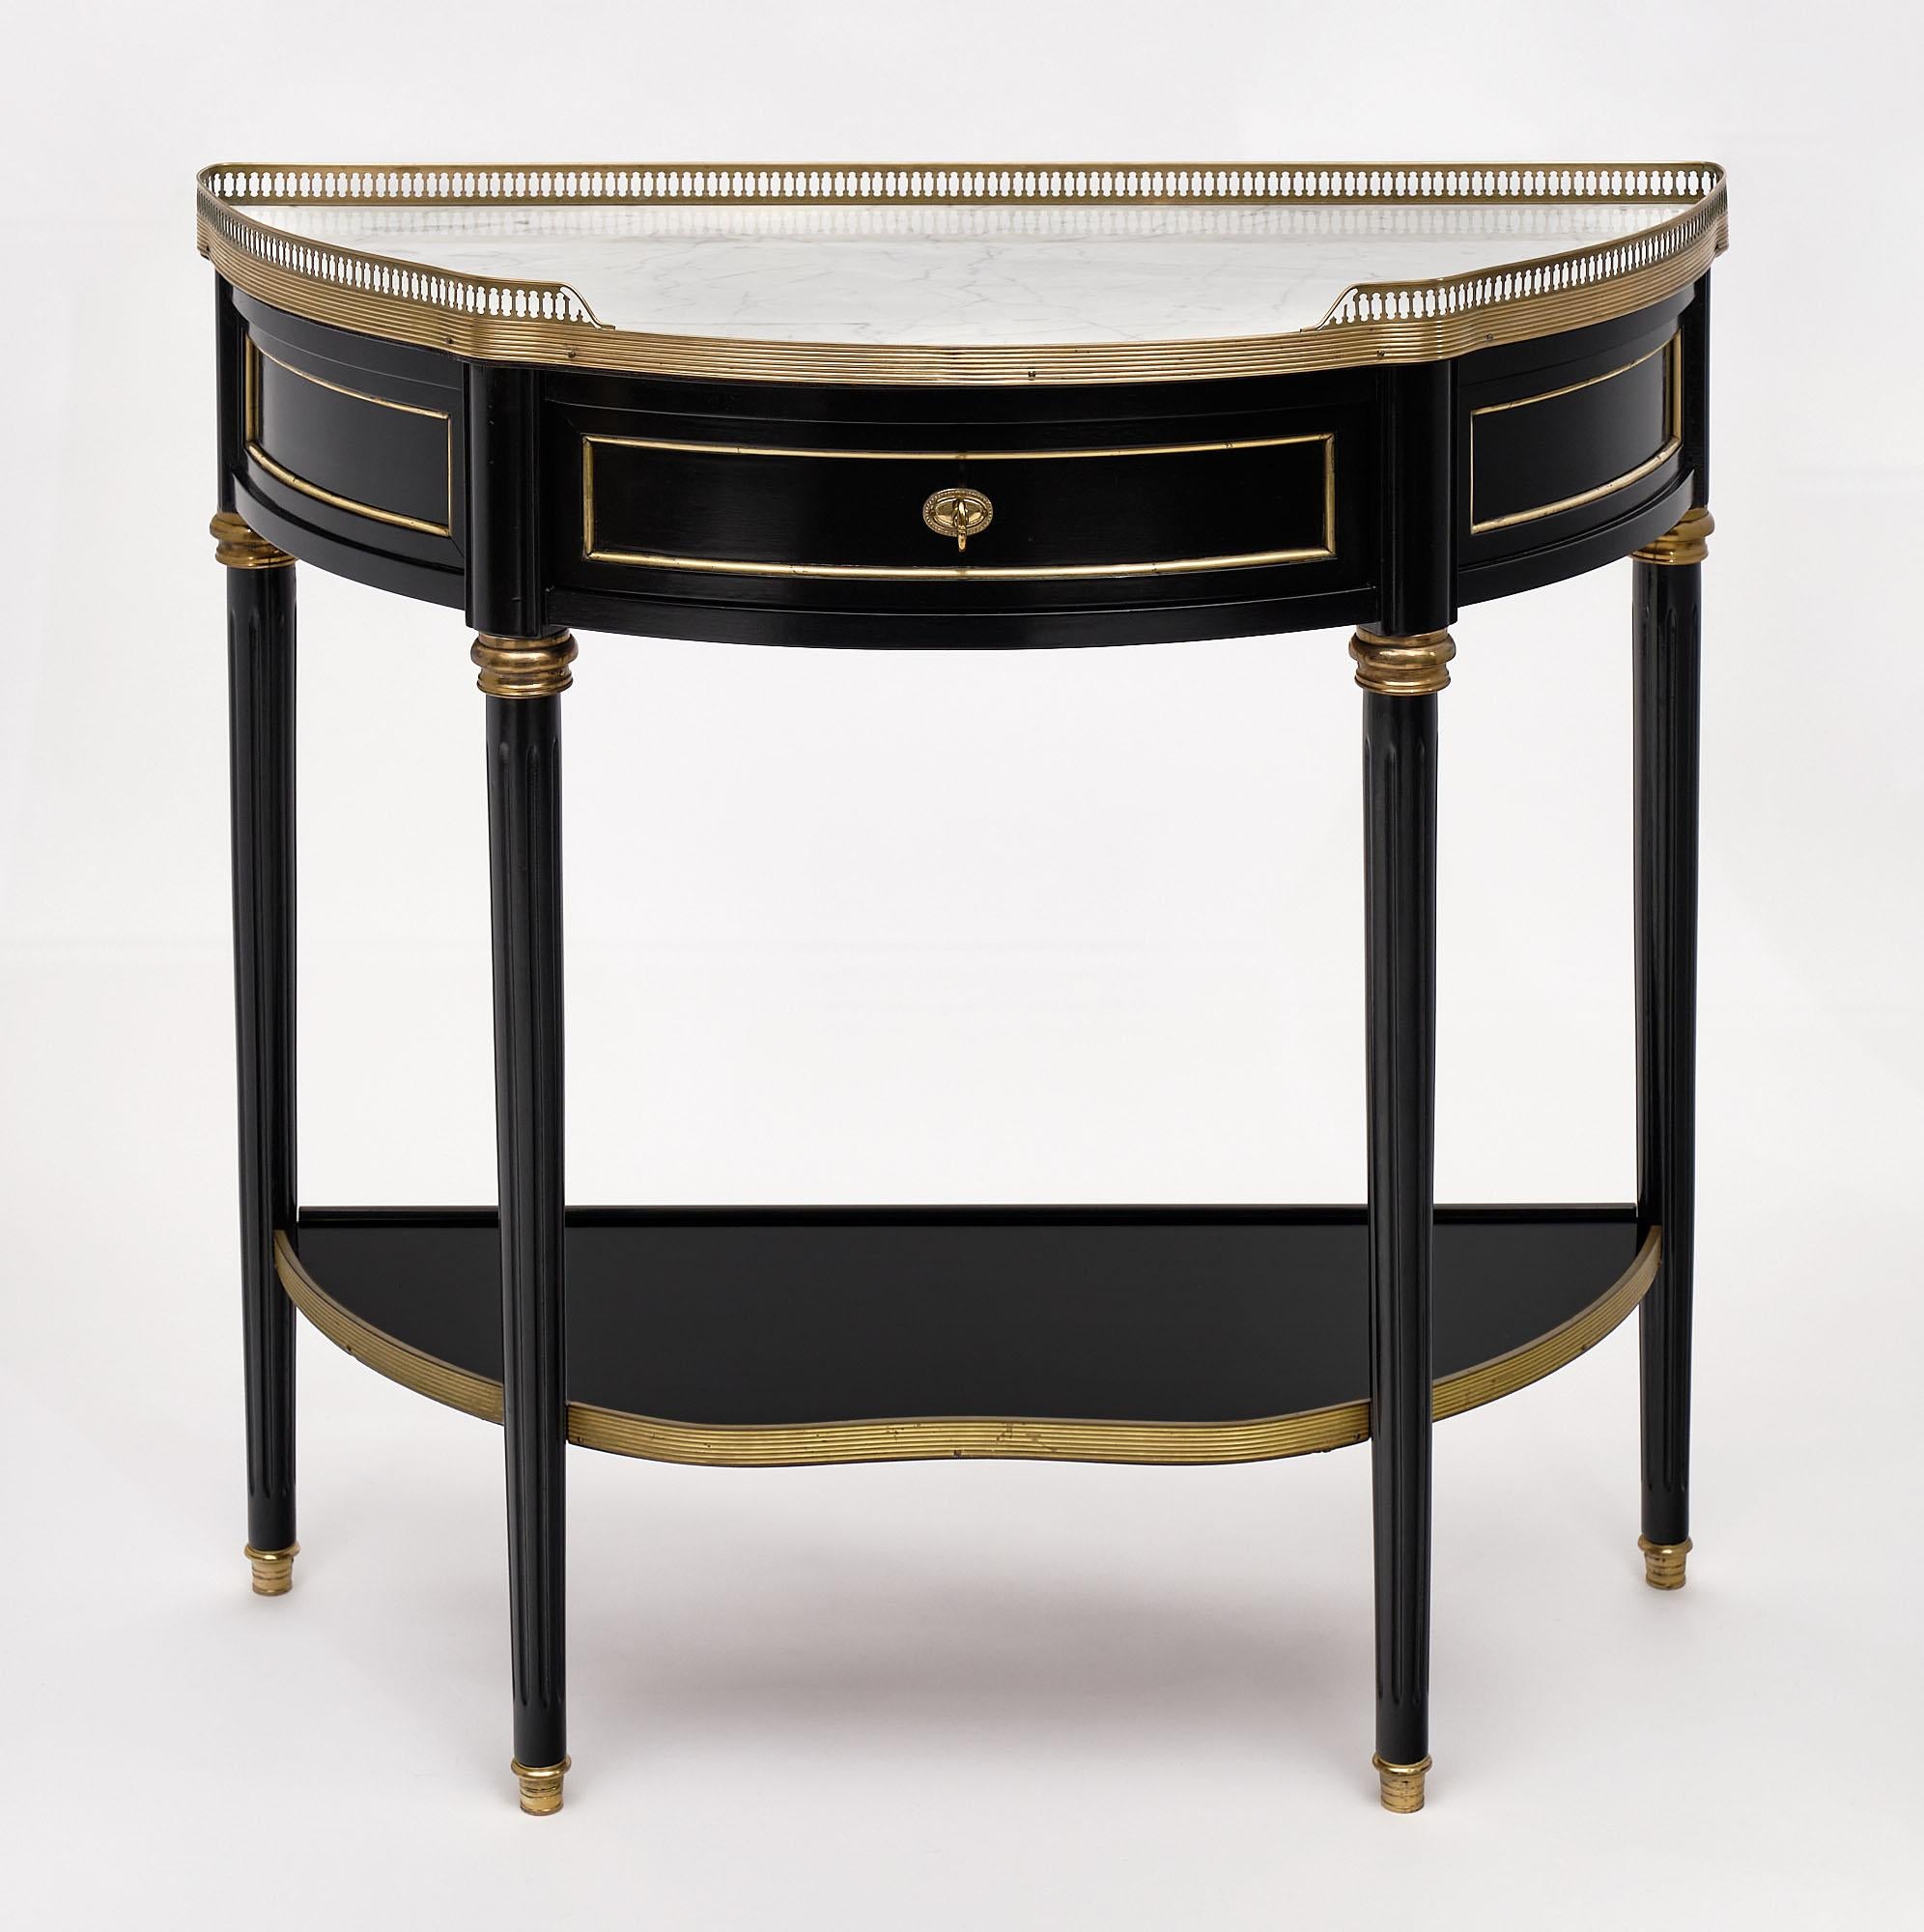 Console, French, “demilune” in the Louis XVI style featuring an intact Carrara marble top and opened brass gallery. There is gilt brass trim throughout. We liked the single drawer in the apron of this elegant piece. The wood has been ebonized and